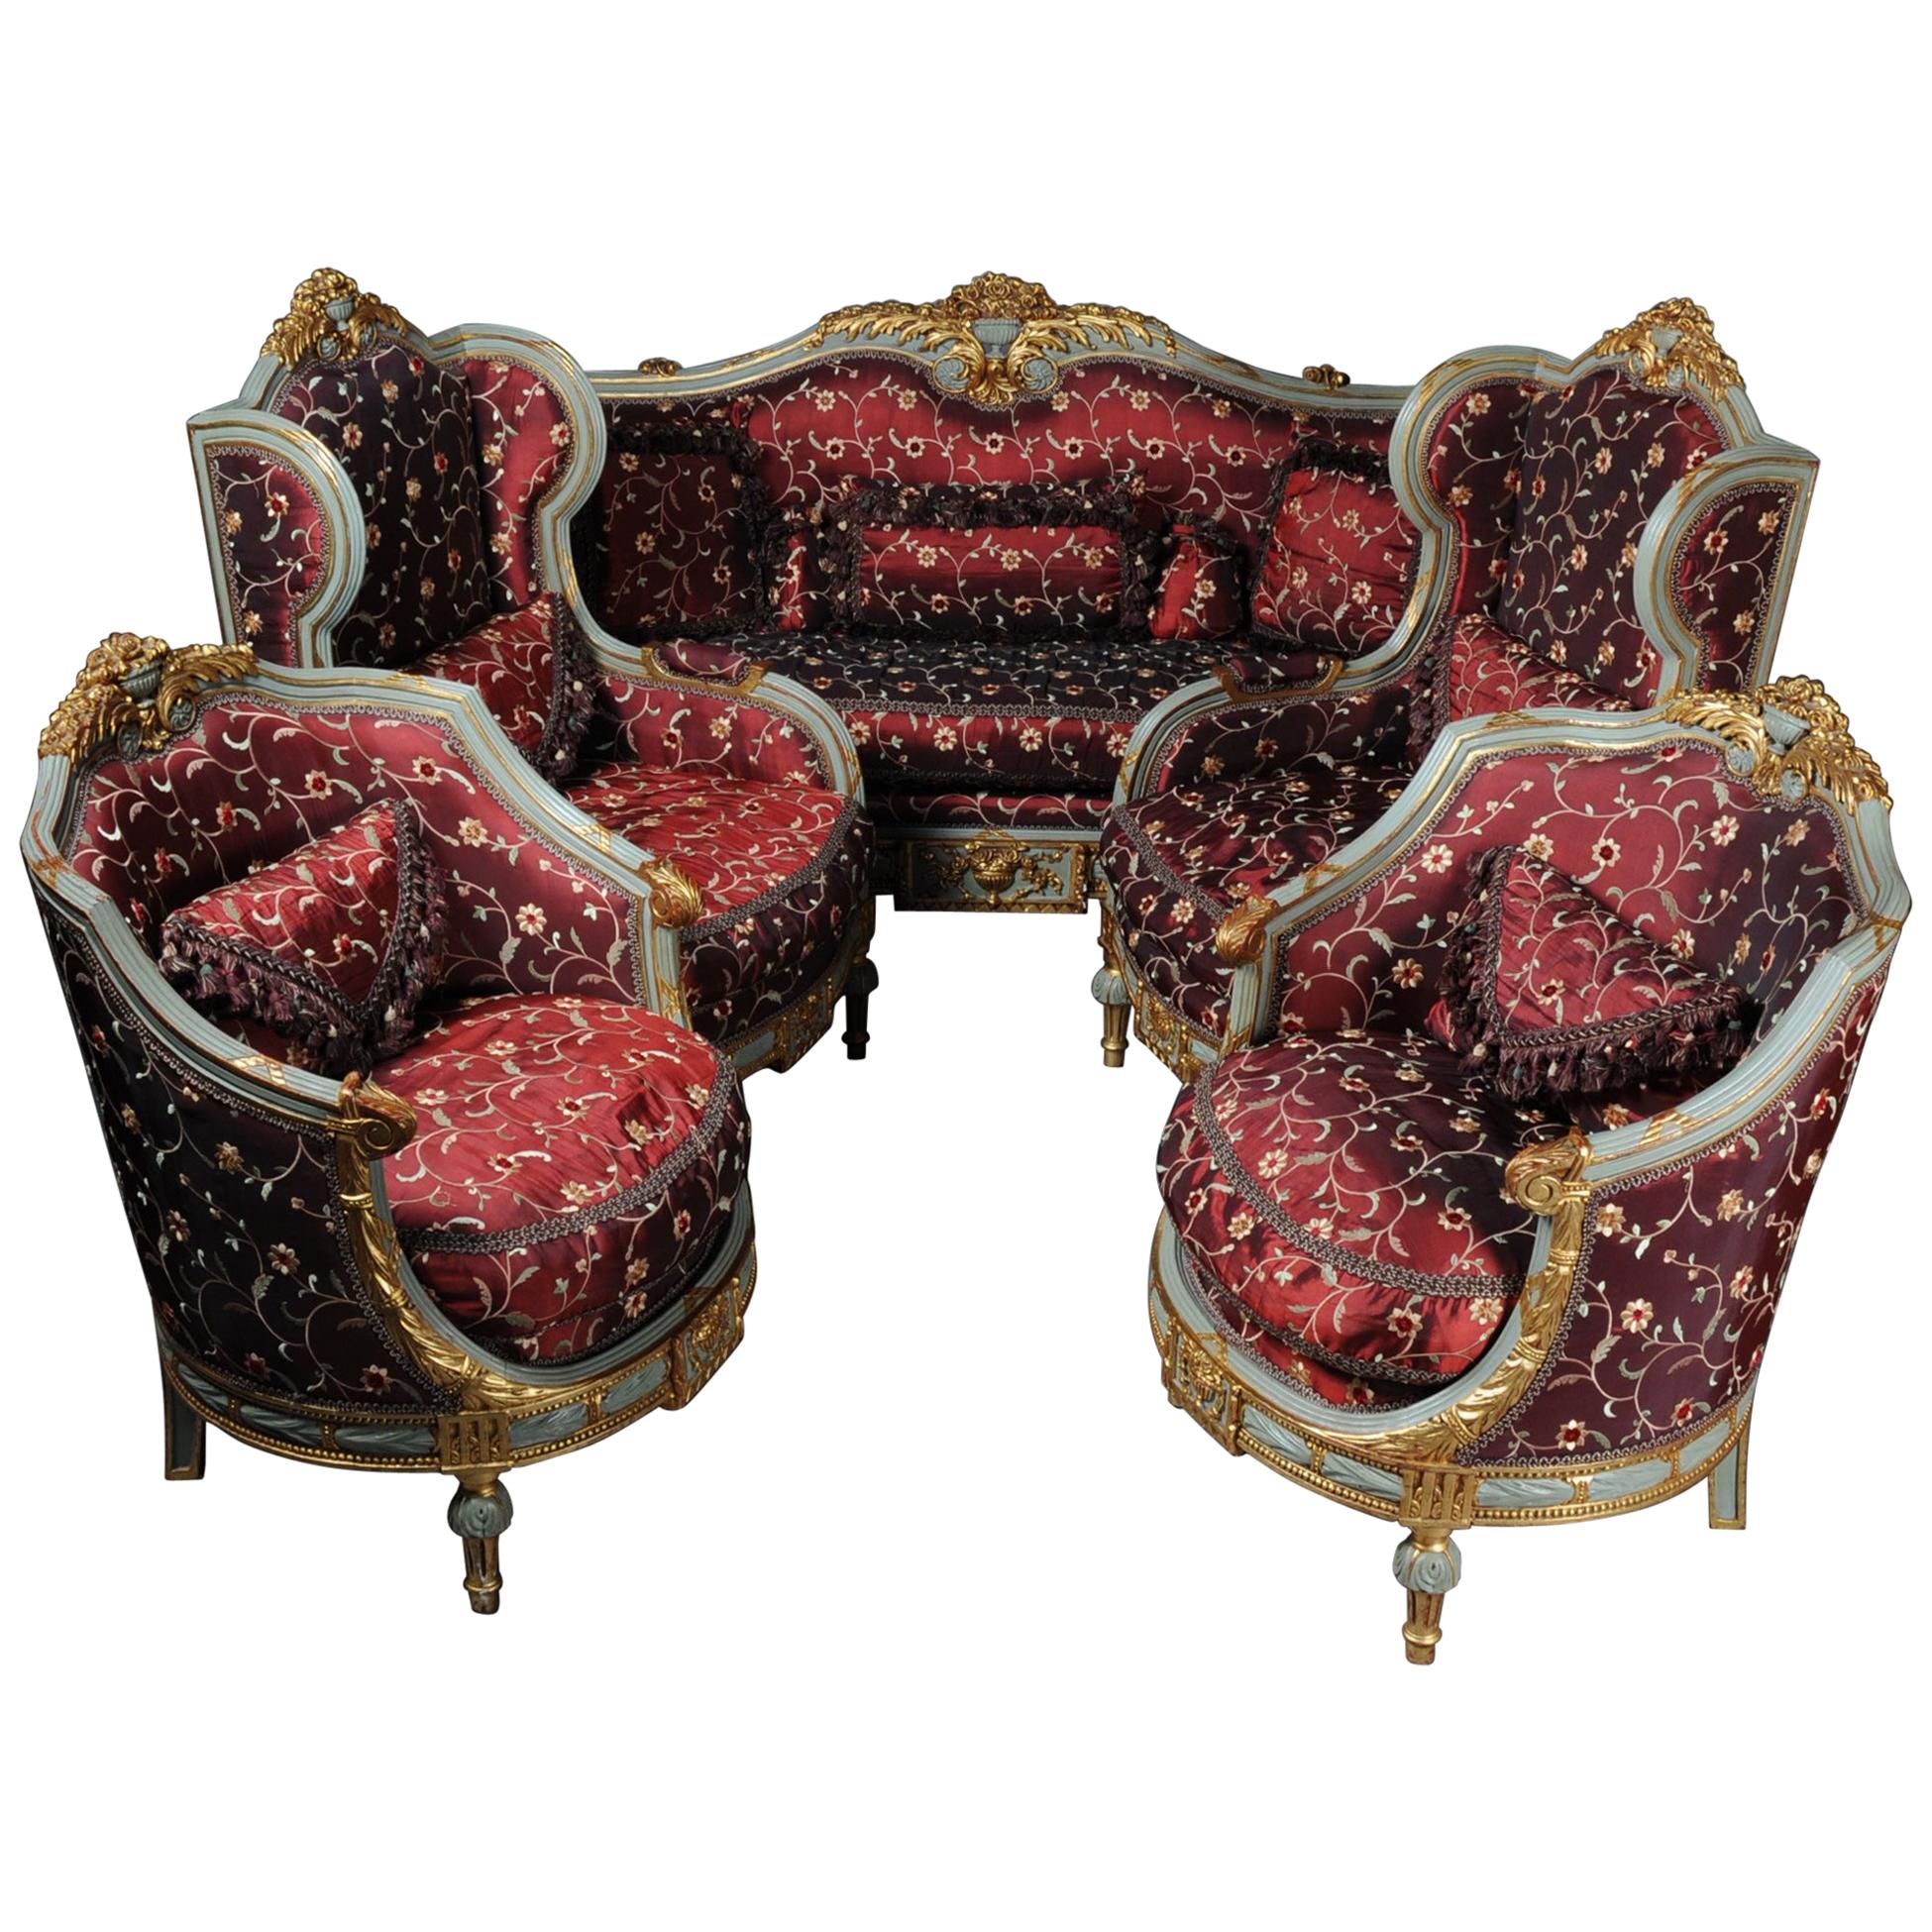 20th Century Unique French Salon Seating Group in Louis XVI Style